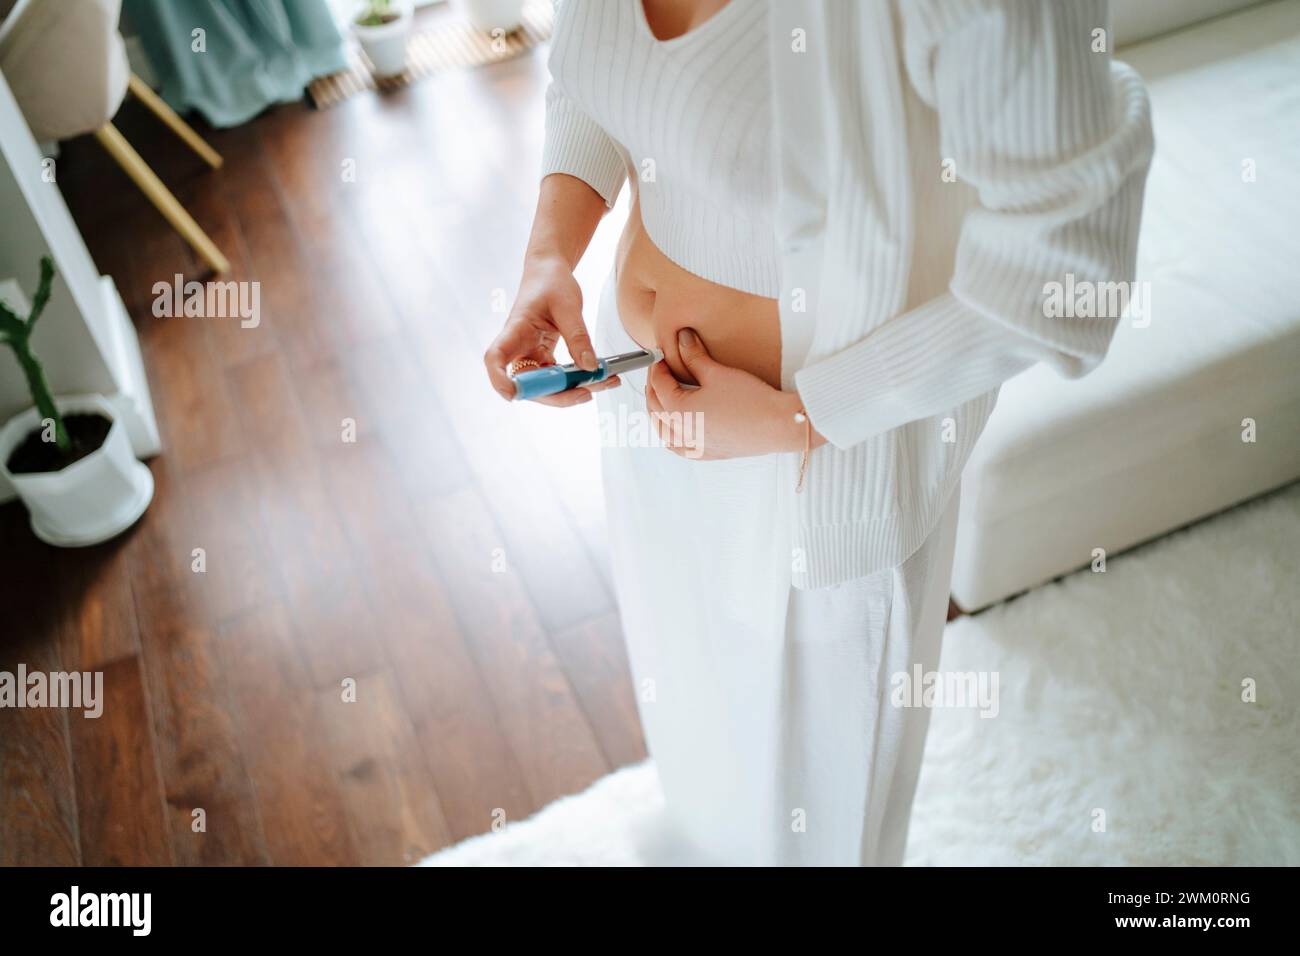 Woman injecting insulin dose in stomach at home Stock Photo